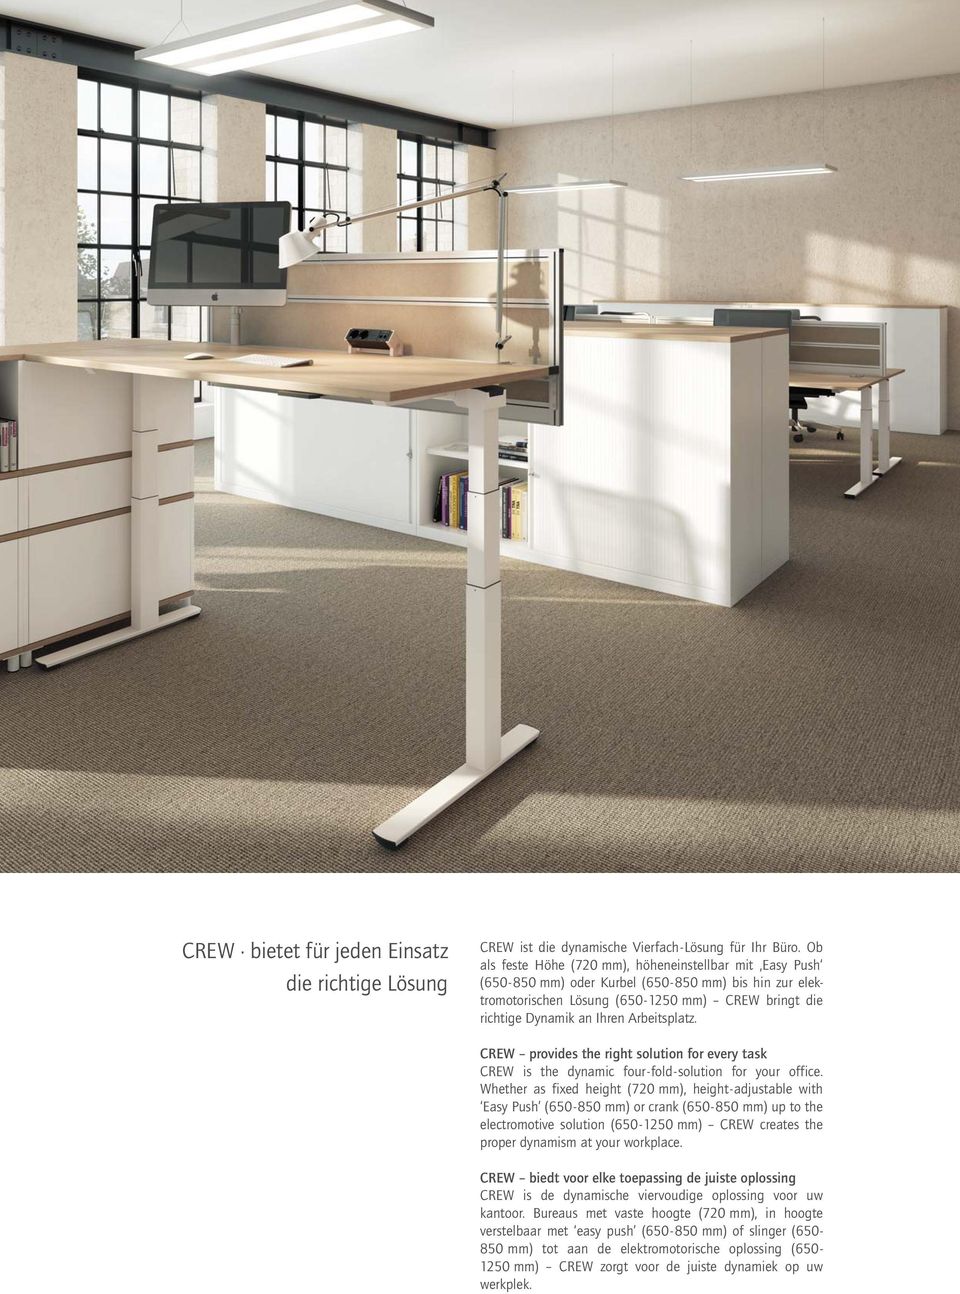 Arbeitsplatz. CREW provides the right solution for every task CREW is the dynamic four-fold-solution for your office.